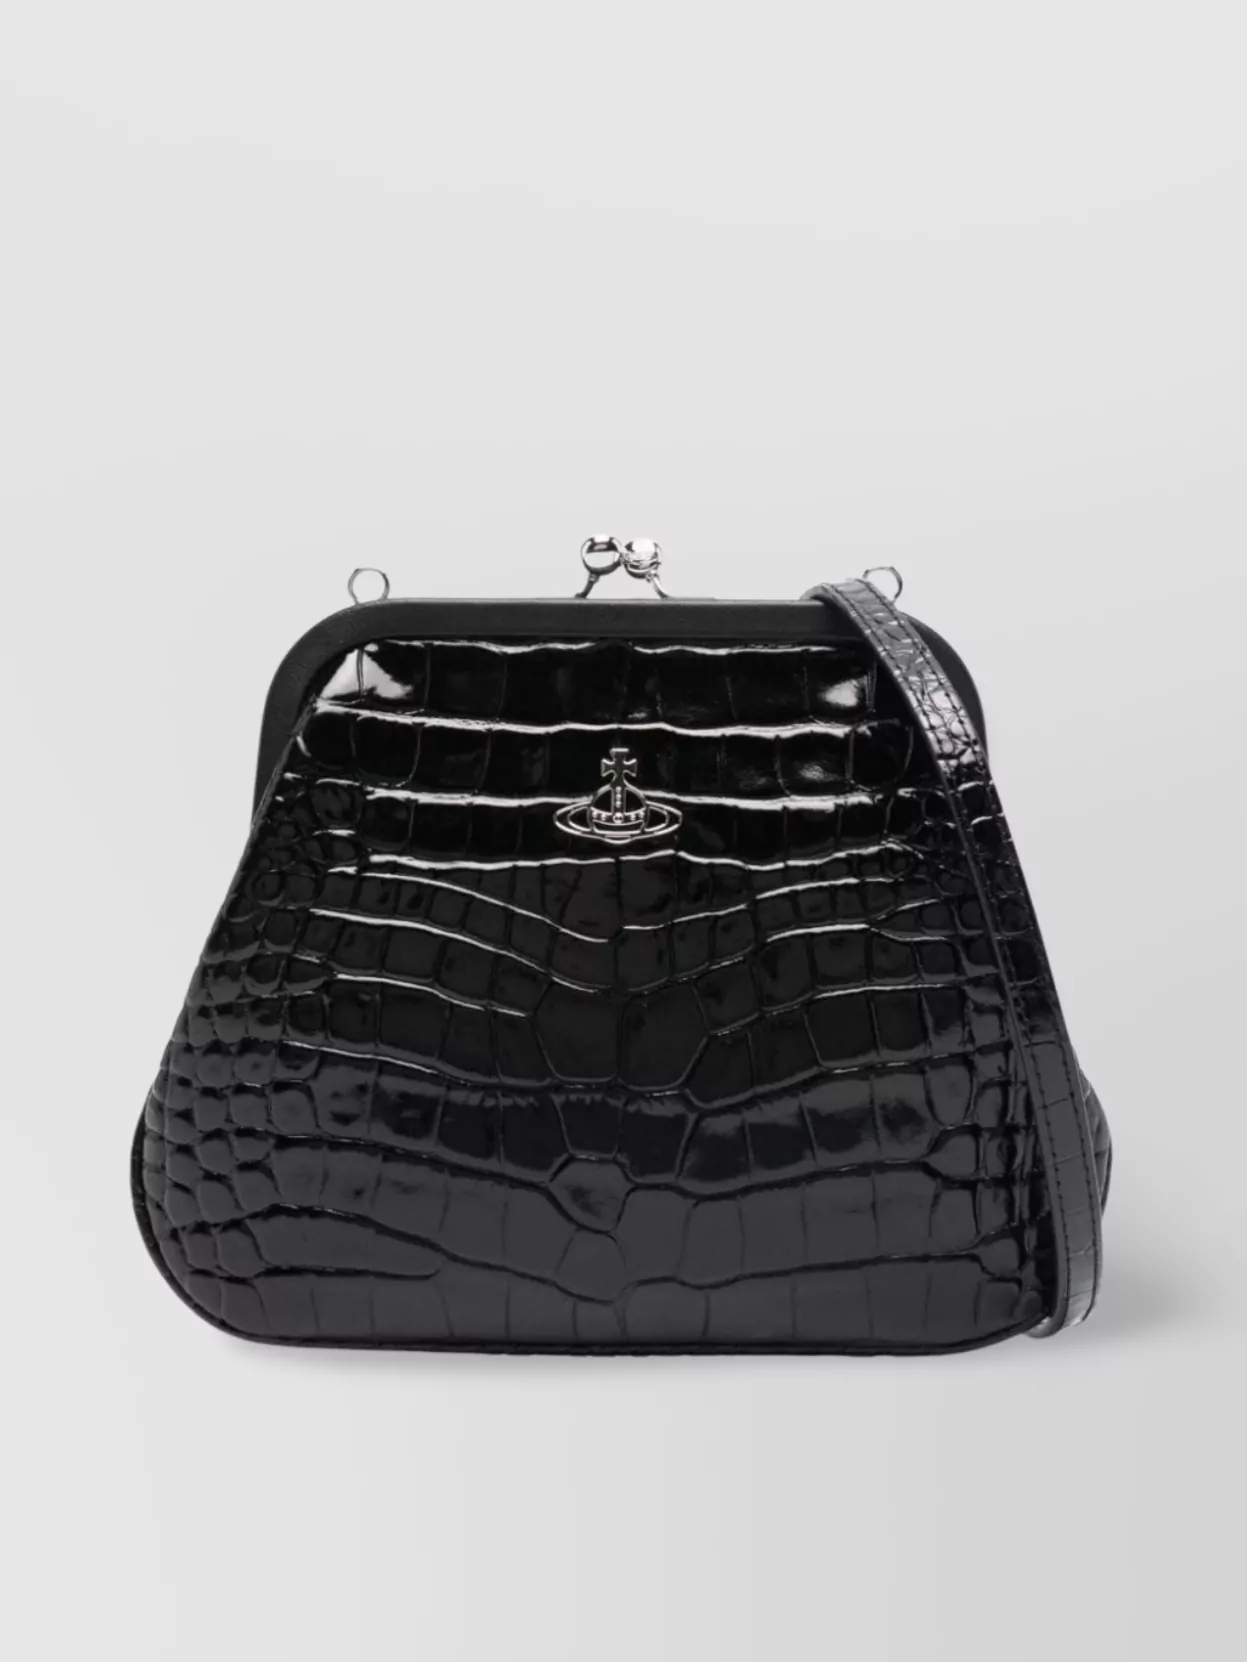 VIVIENNE WESTWOOD EXQUISITE CROCODILE EMBOSSED CLUTCH WITH DETACHABLE STRAP